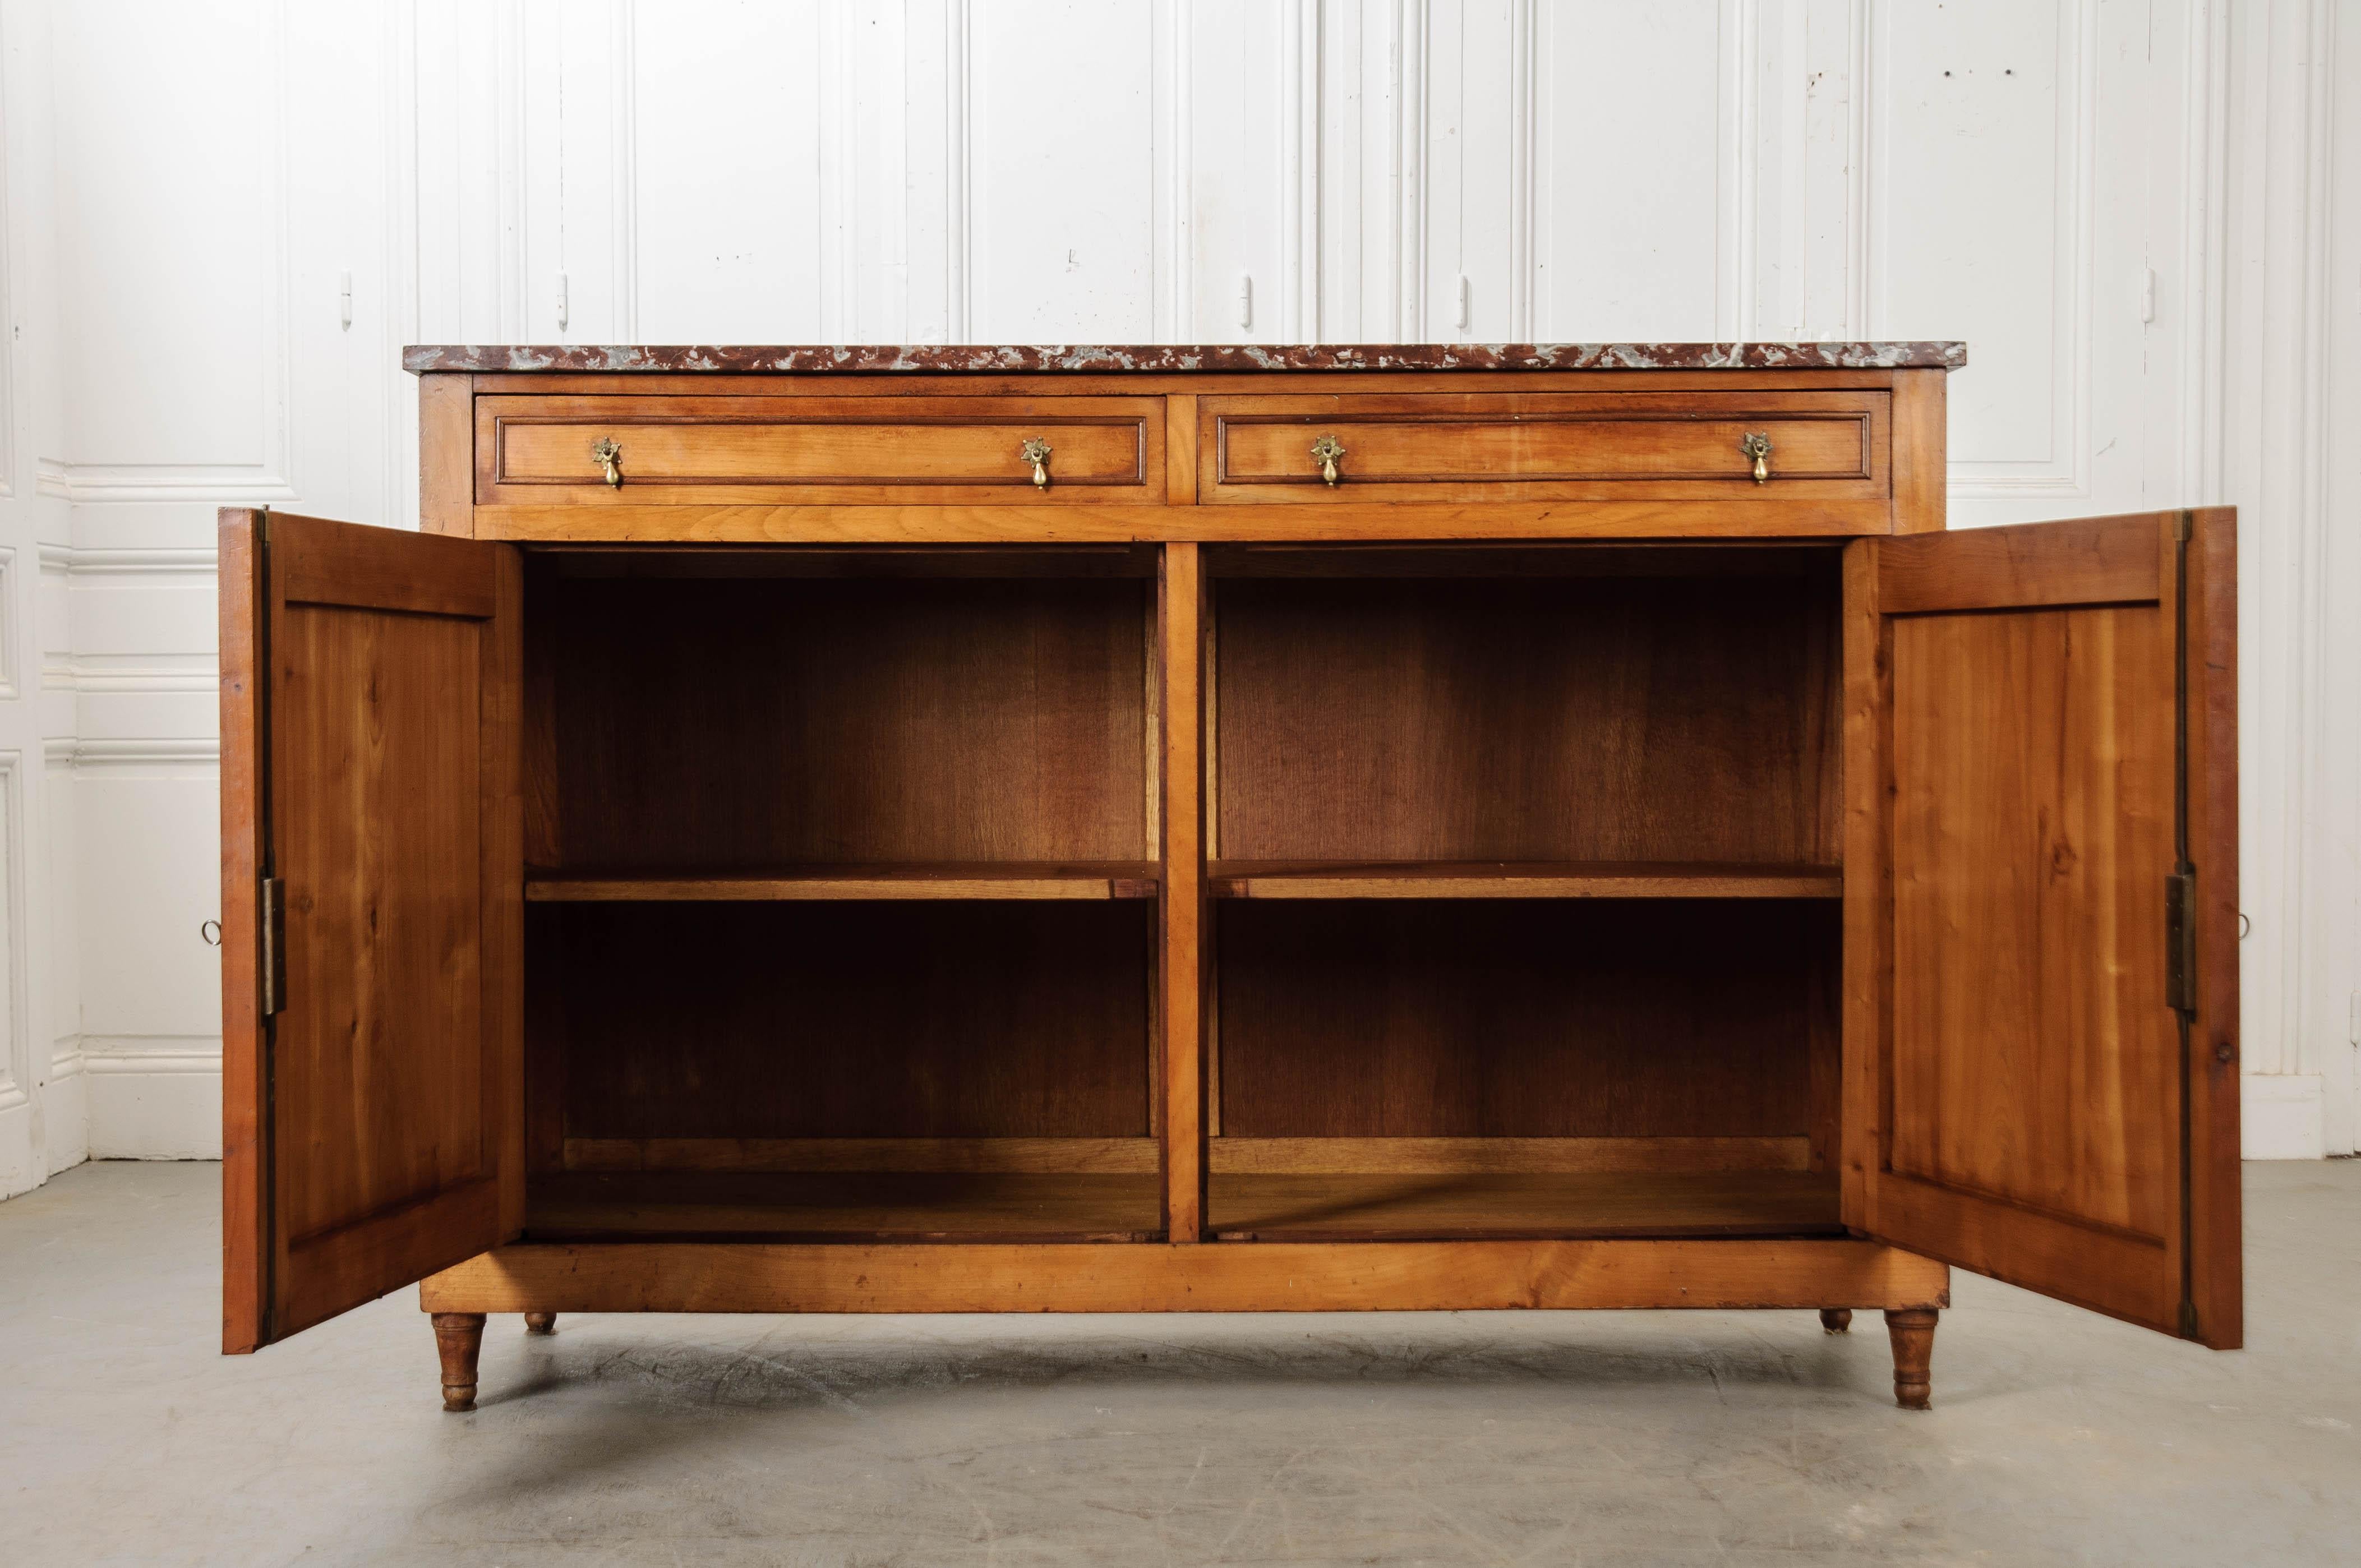 A beautifully-toned fruitwood buffet, made in France, circa 1860. The two-door, two-drawer case piece is topped with an incredibly beautiful piece of rouge and gray marble. With the exception of an old break at the piece’s back corner, the marble is